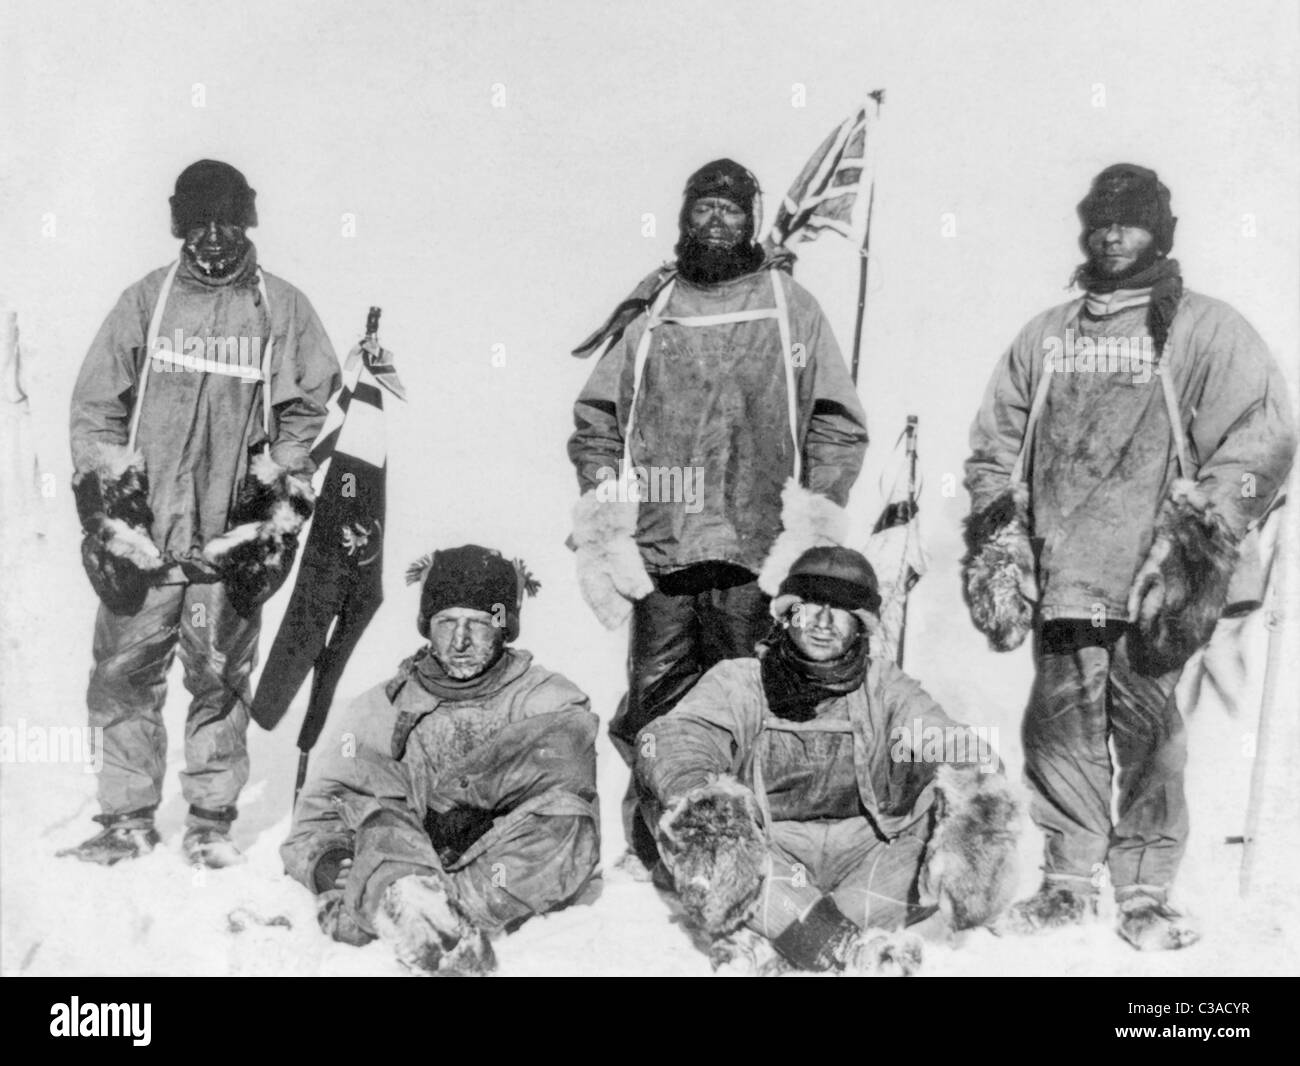 Robert Falcon Scott and members of his Terra Nova Expedition of 1910 - 1913 at the South Pole in Antarctica in January 1912. Stock Photo